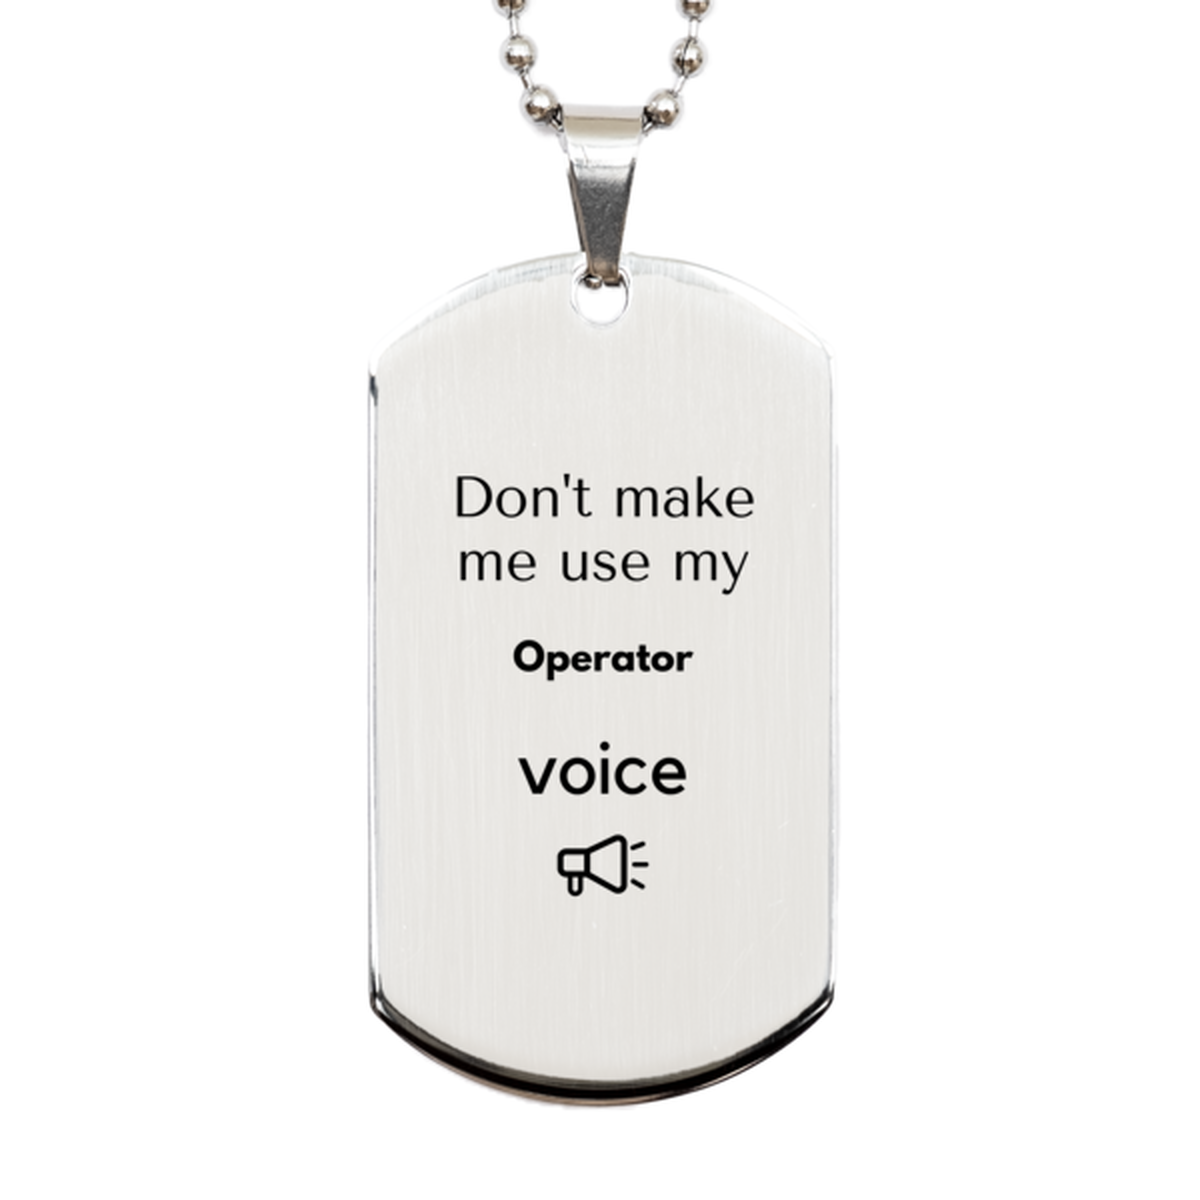 Don't make me use my Operator voice, Sarcasm Operator Gifts, Christmas Operator Silver Dog Tag Birthday Unique Gifts For Operator Coworkers, Men, Women, Colleague, Friends